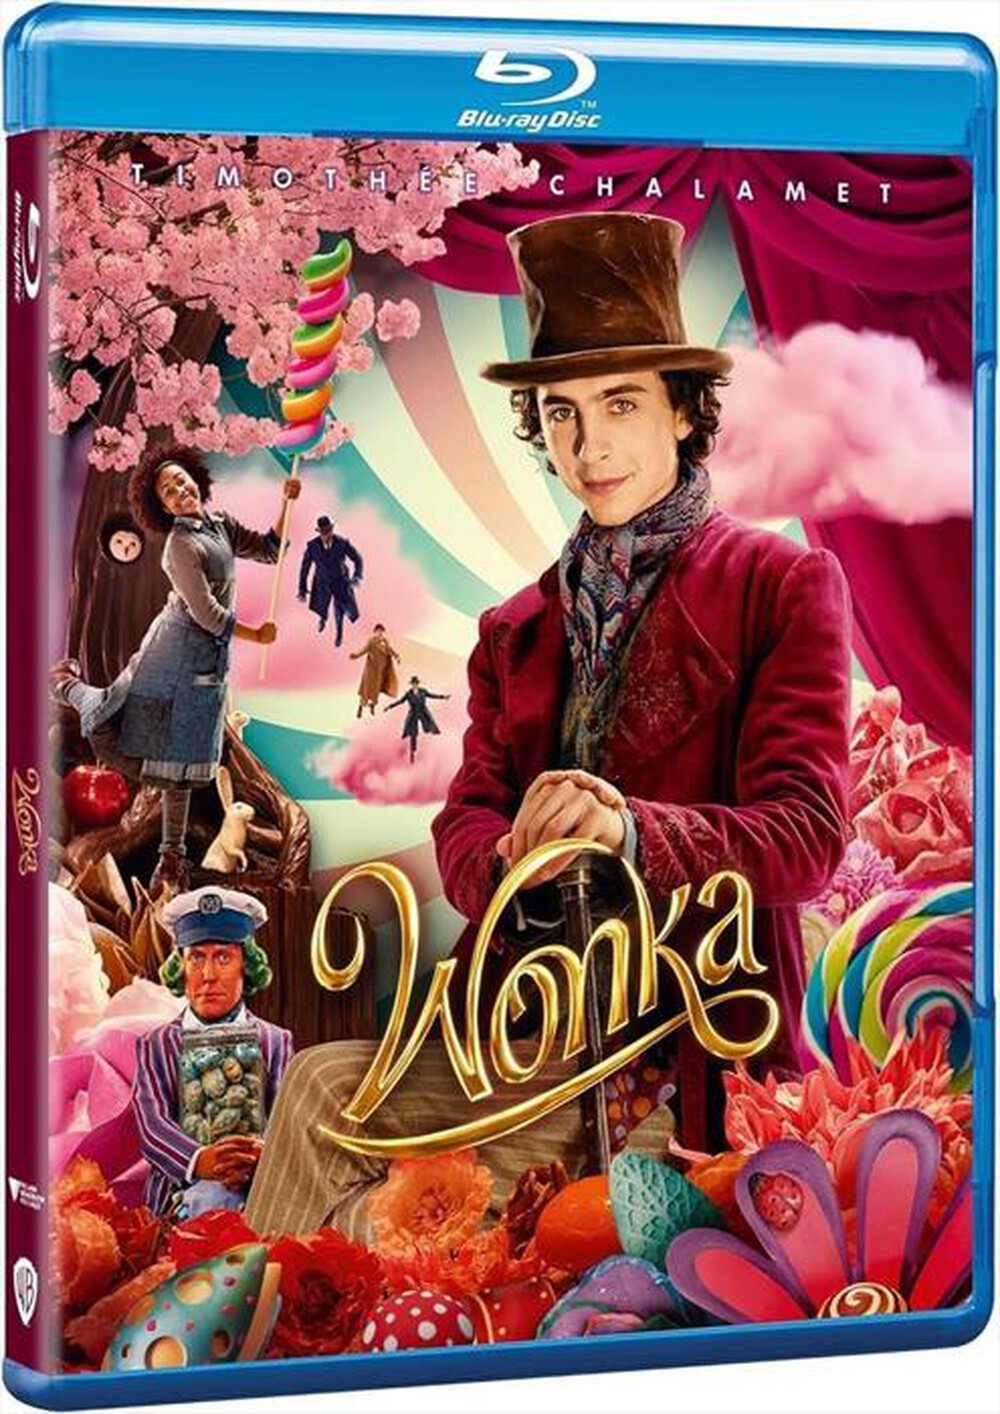 "UNIVERSAL PICTURES - Wonka"